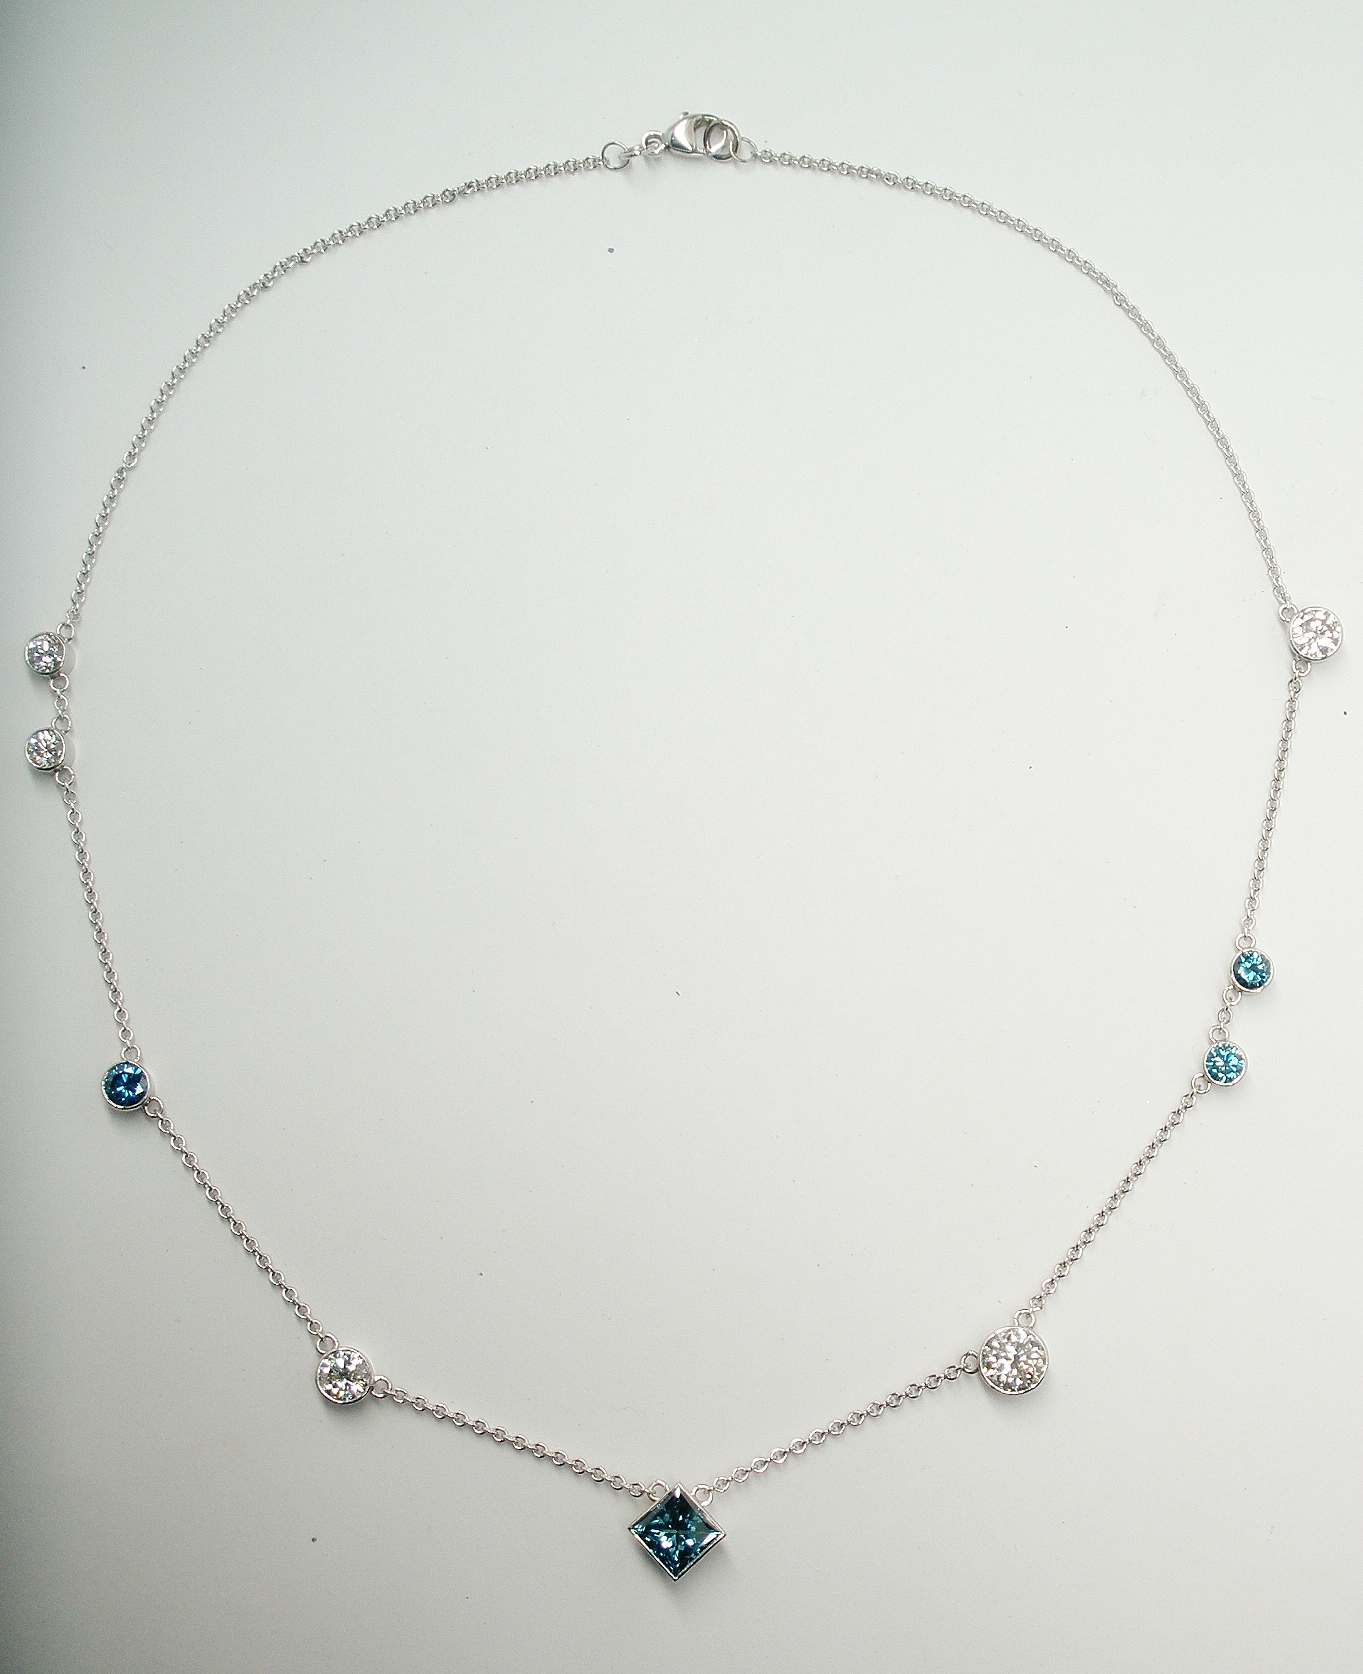 A 9 stone ocean blue and white Princess cut and round brilliant cut diamond necklace remodelled from a ring, pendant and pair of earrings.